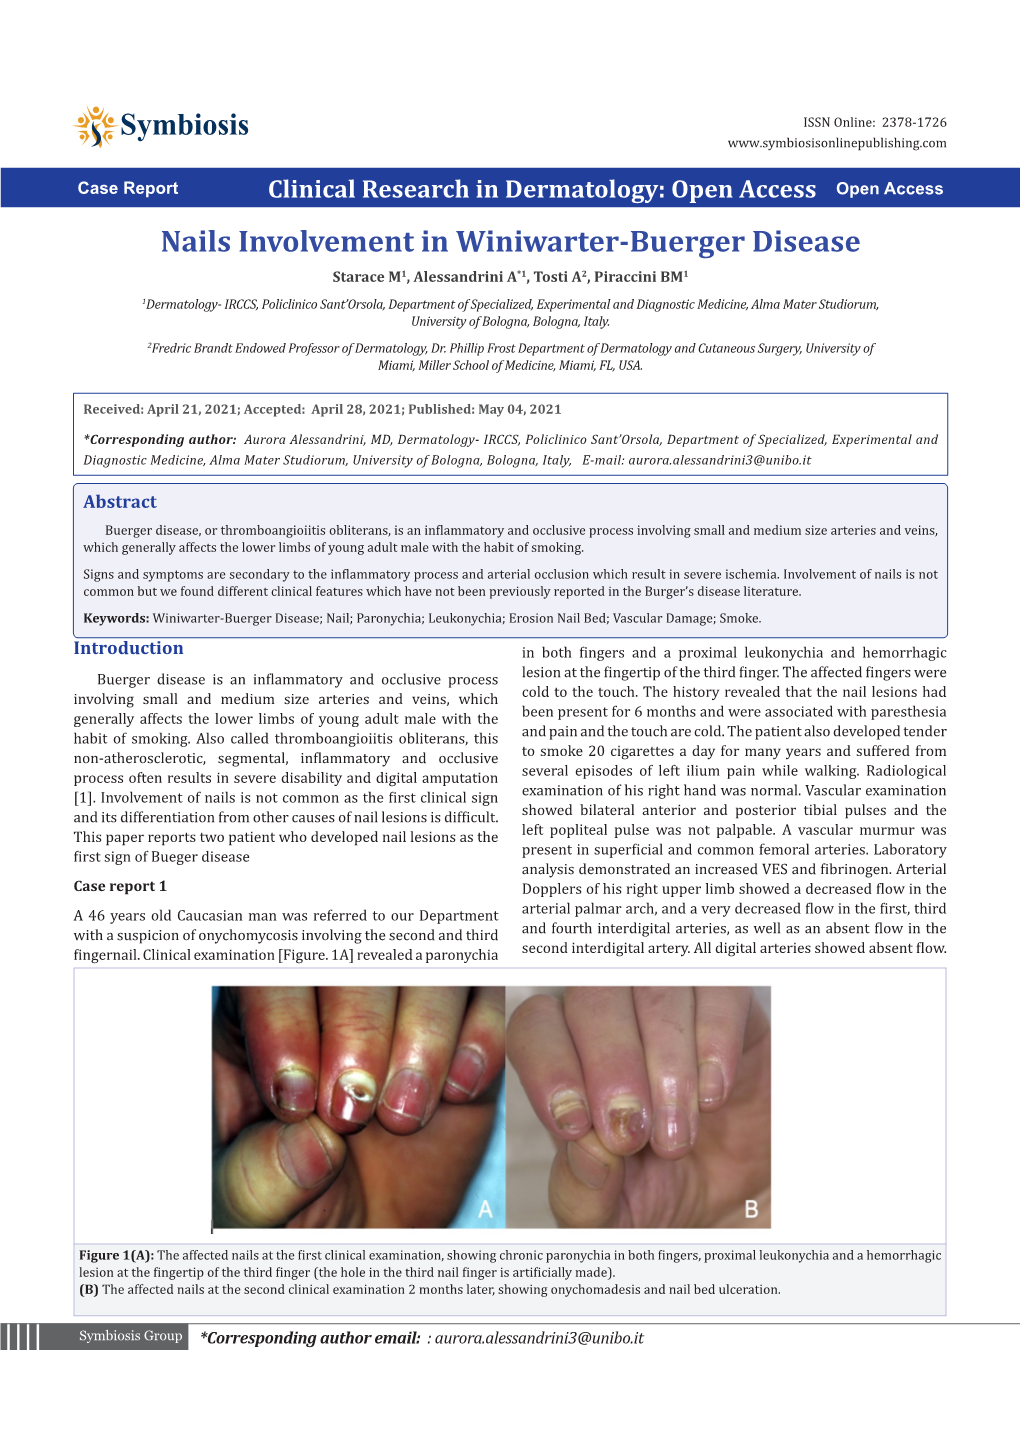 Nails Involvement in Winiwarter-Buerger Disease